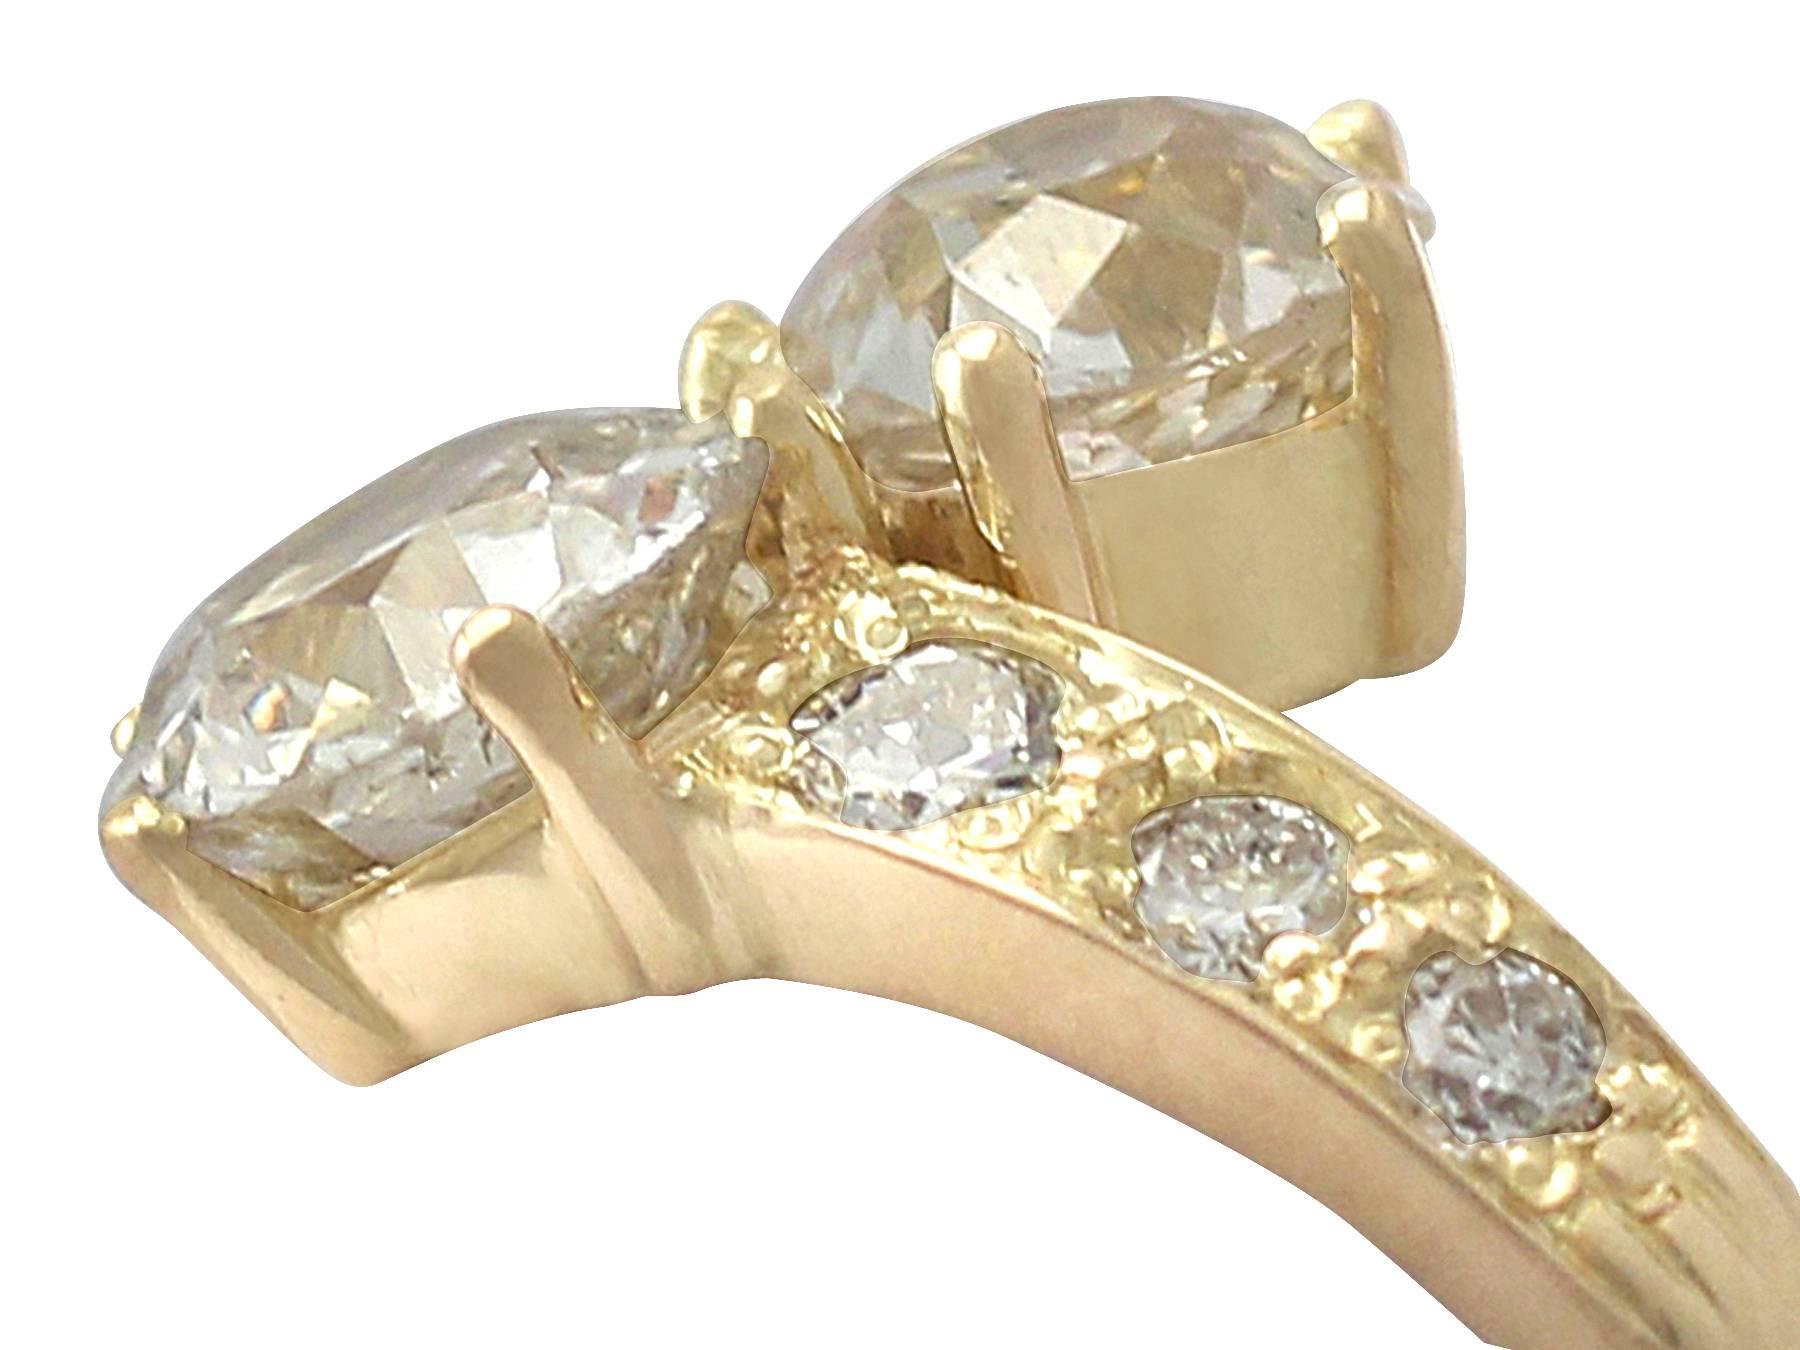 A stunning, fine and impressive antique 3.27 carat diamond and 18 karat yellow gold twist ring; part of our antique jewelry and estate jewelry collections

This stunning antique diamond twist ring has been crafted in 18k yellow gold.

The impressive